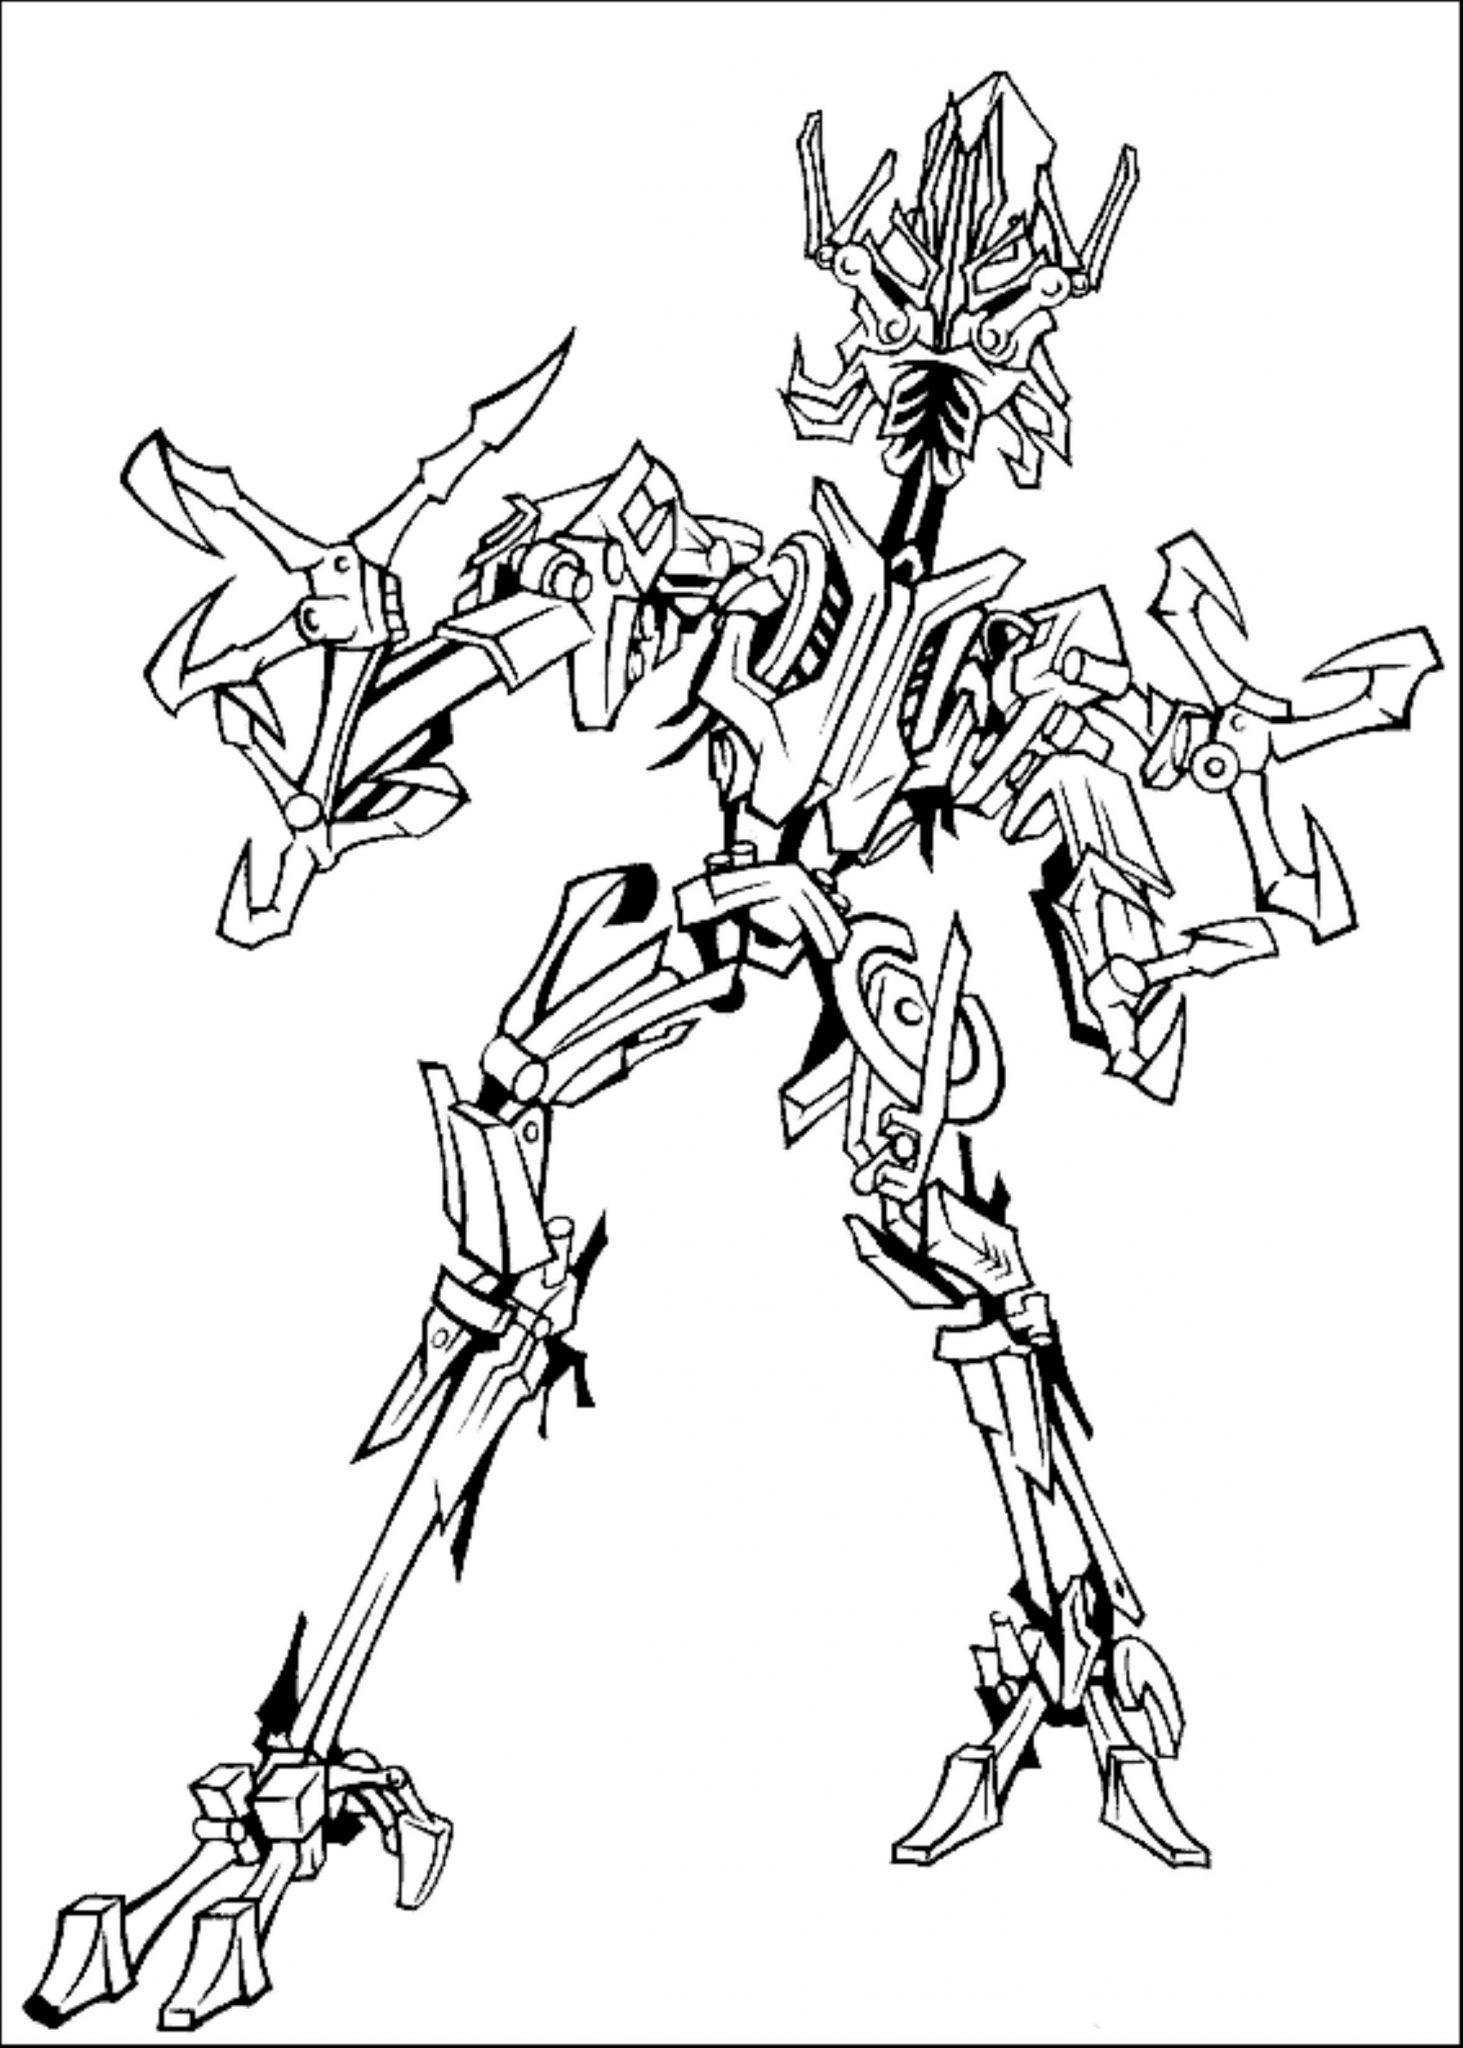 Print & Download Inviting Kids to Do the Transformers Coloring Pages